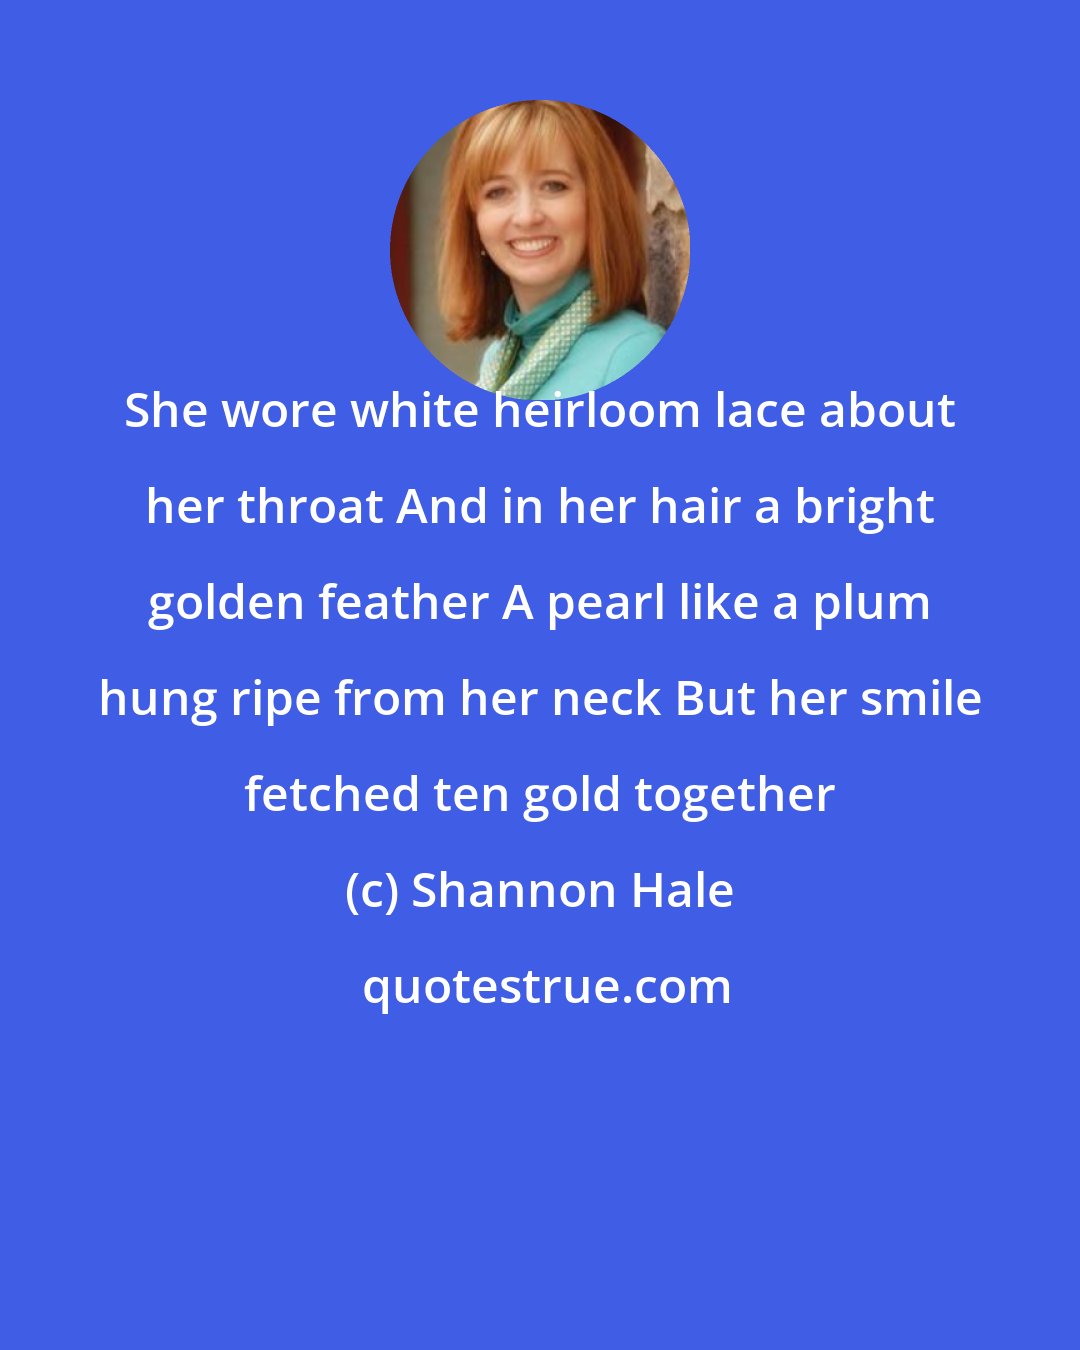 Shannon Hale: She wore white heirloom lace about her throat And in her hair a bright golden feather A pearl like a plum hung ripe from her neck But her smile fetched ten gold together